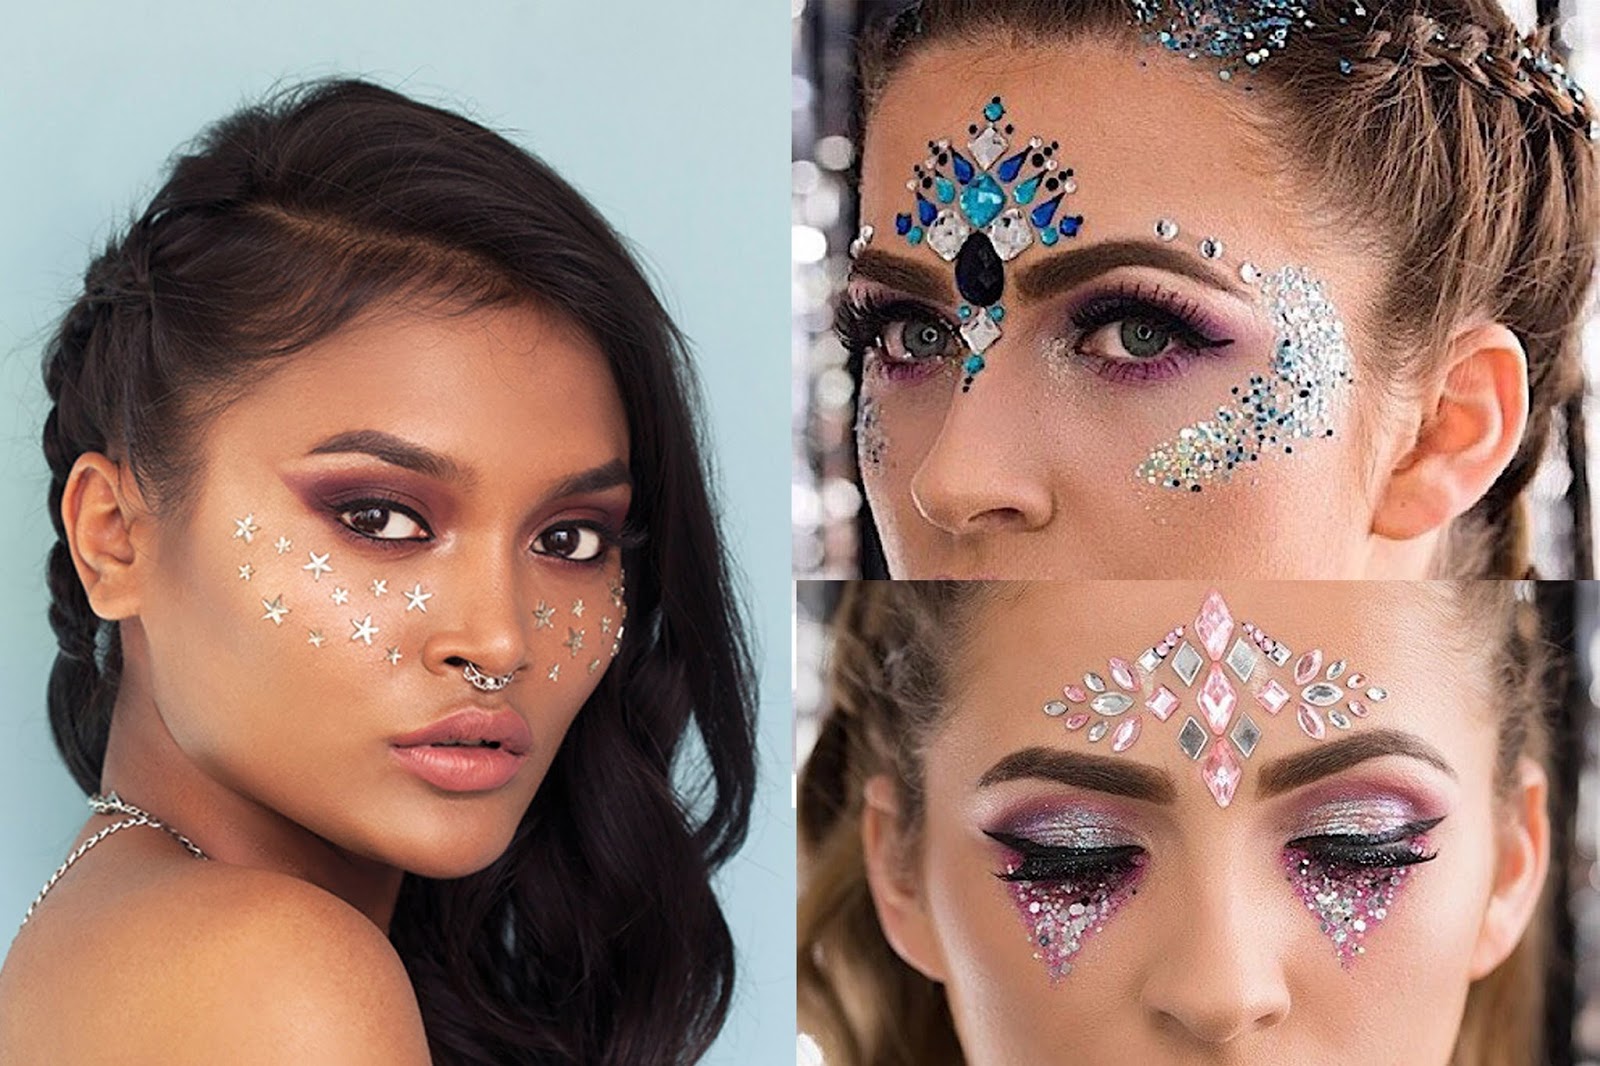 Hair & Make-up Trends That Are Perfect For Festival Season